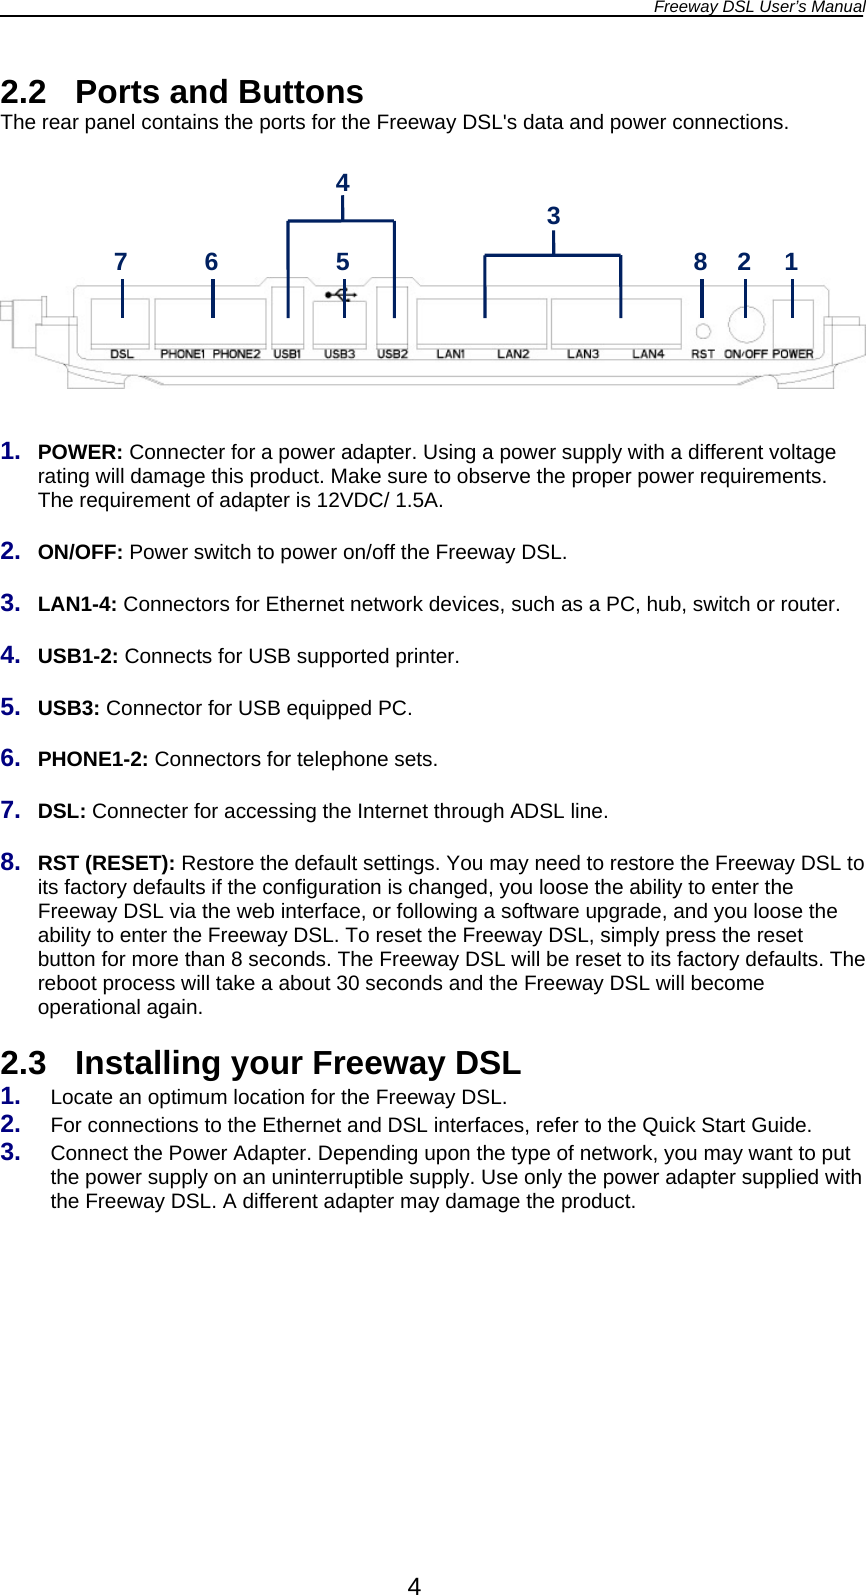 Freeway DSL User’s Manual  4 2.2  Ports and Buttons The rear panel contains the ports for the Freeway DSL&apos;s data and power connections.          1.  POWER: Connecter for a power adapter. Using a power supply with a different voltage rating will damage this product. Make sure to observe the proper power requirements. The requirement of adapter is 12VDC/ 1.5A.  2.  ON/OFF: Power switch to power on/off the Freeway DSL.  3.  LAN1-4: Connectors for Ethernet network devices, such as a PC, hub, switch or router.  4.  USB1-2: Connects for USB supported printer.  5.  USB3: Connector for USB equipped PC.  6.  PHONE1-2: Connectors for telephone sets.  7.  DSL: Connecter for accessing the Internet through ADSL line.  8.  RST (RESET): Restore the default settings. You may need to restore the Freeway DSL to its factory defaults if the configuration is changed, you loose the ability to enter the Freeway DSL via the web interface, or following a software upgrade, and you loose the ability to enter the Freeway DSL. To reset the Freeway DSL, simply press the reset button for more than 8 seconds. The Freeway DSL will be reset to its factory defaults. The reboot process will take a about 30 seconds and the Freeway DSL will become operational again.  2.3  Installing your Freeway DSL 1.  Locate an optimum location for the Freeway DSL. 2.  For connections to the Ethernet and DSL interfaces, refer to the Quick Start Guide. 3.  Connect the Power Adapter. Depending upon the type of network, you may want to put the power supply on an uninterruptible supply. Use only the power adapter supplied with the Freeway DSL. A different adapter may damage the product.   7  6  5 3 8  2  1 4 